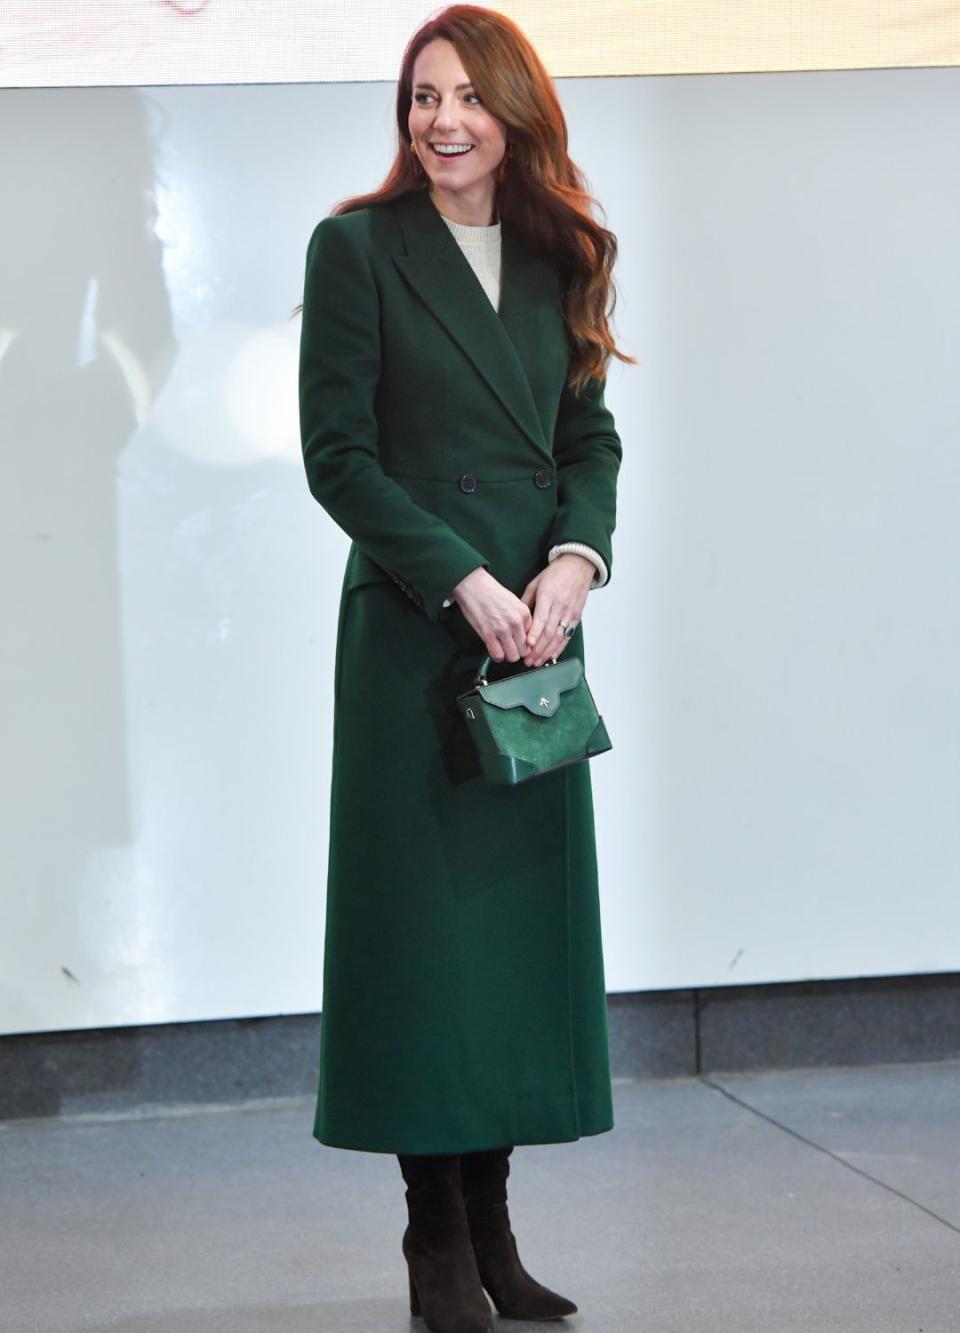 This all-green get-up